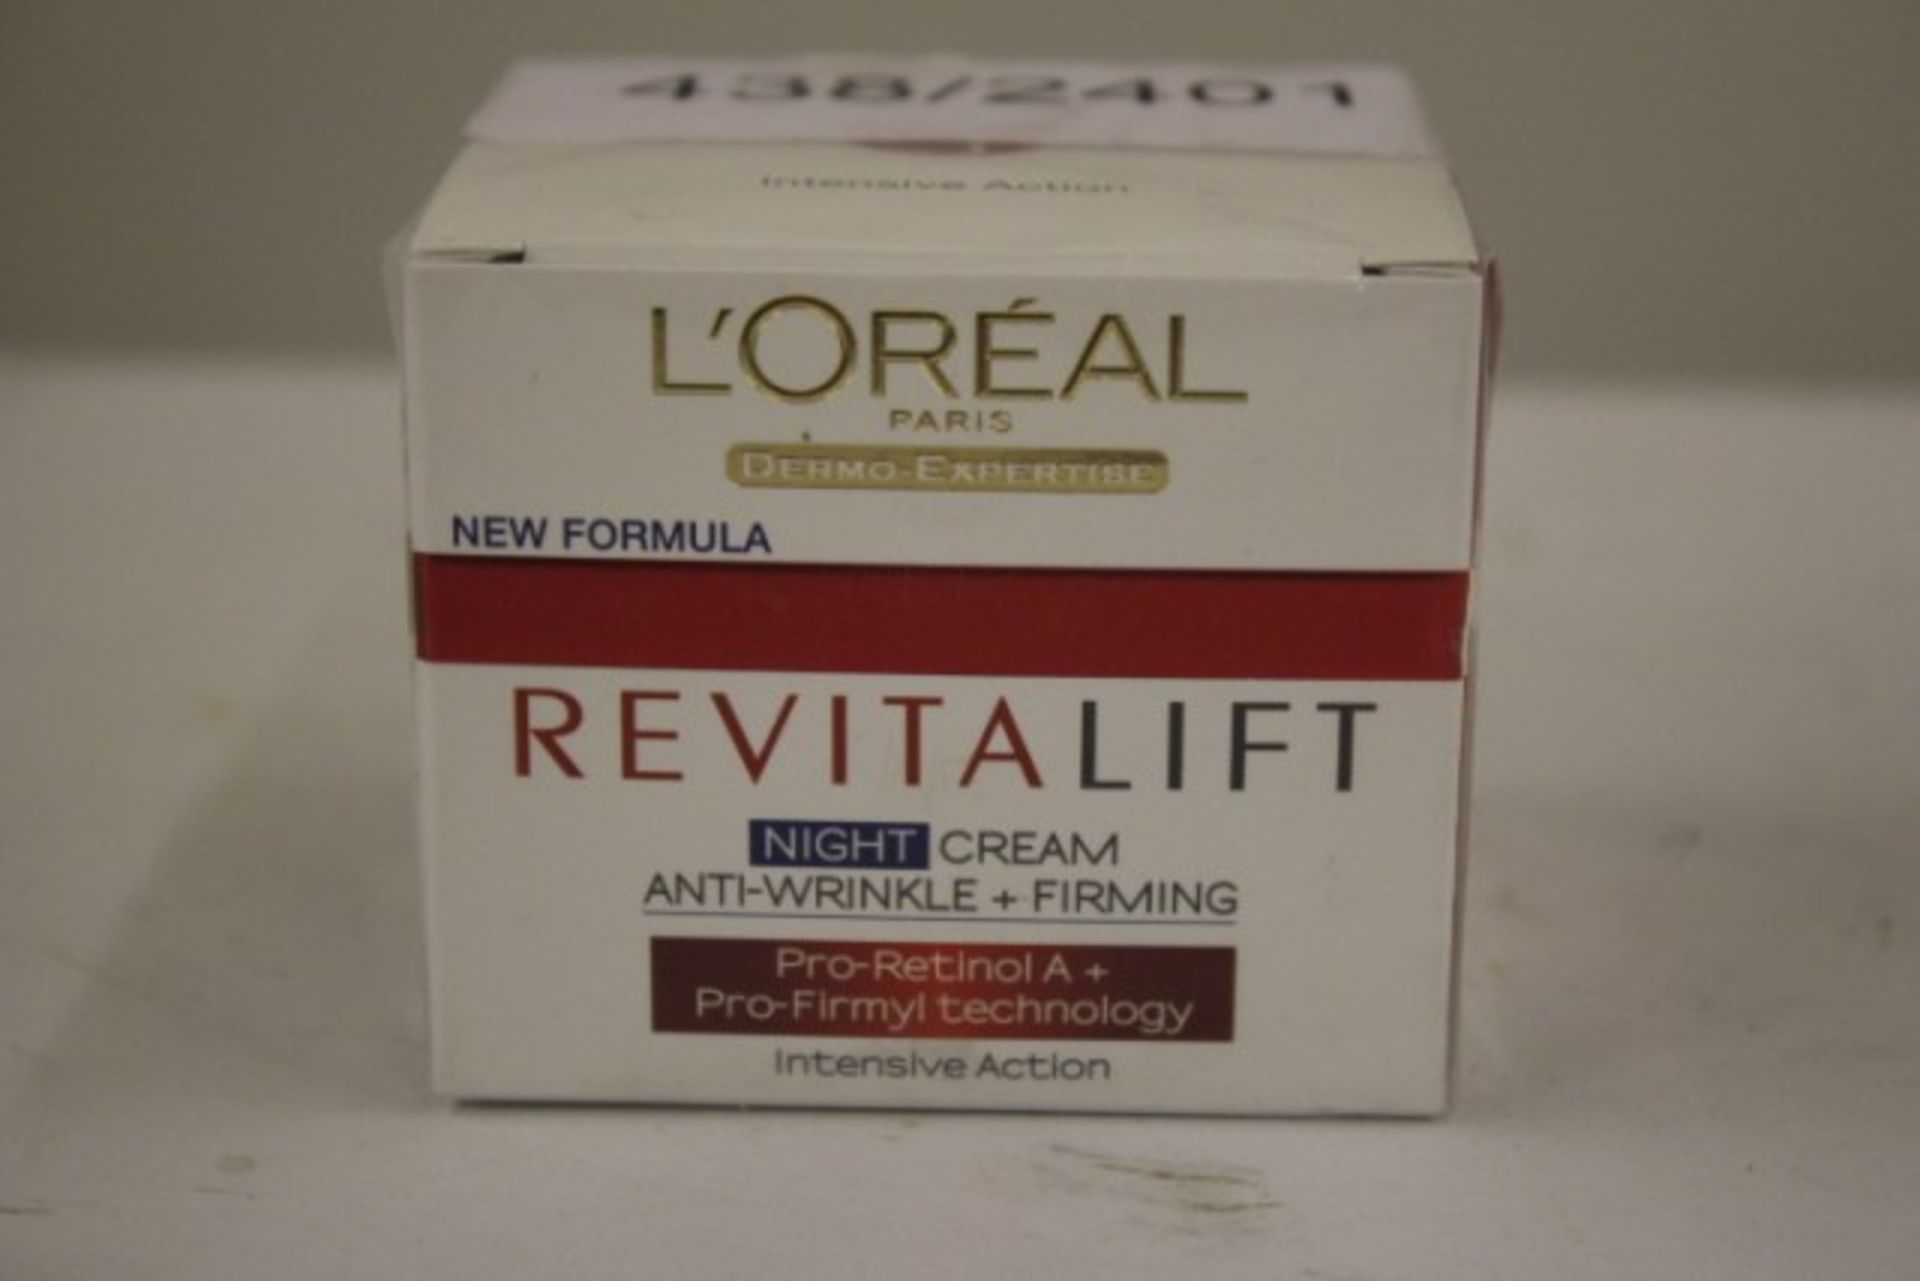 V *TRADE QTY* Brand New L'Oreal Dermo-Expertise Revitalift Anti-Wrinkle + Firming Night Cream 50ml